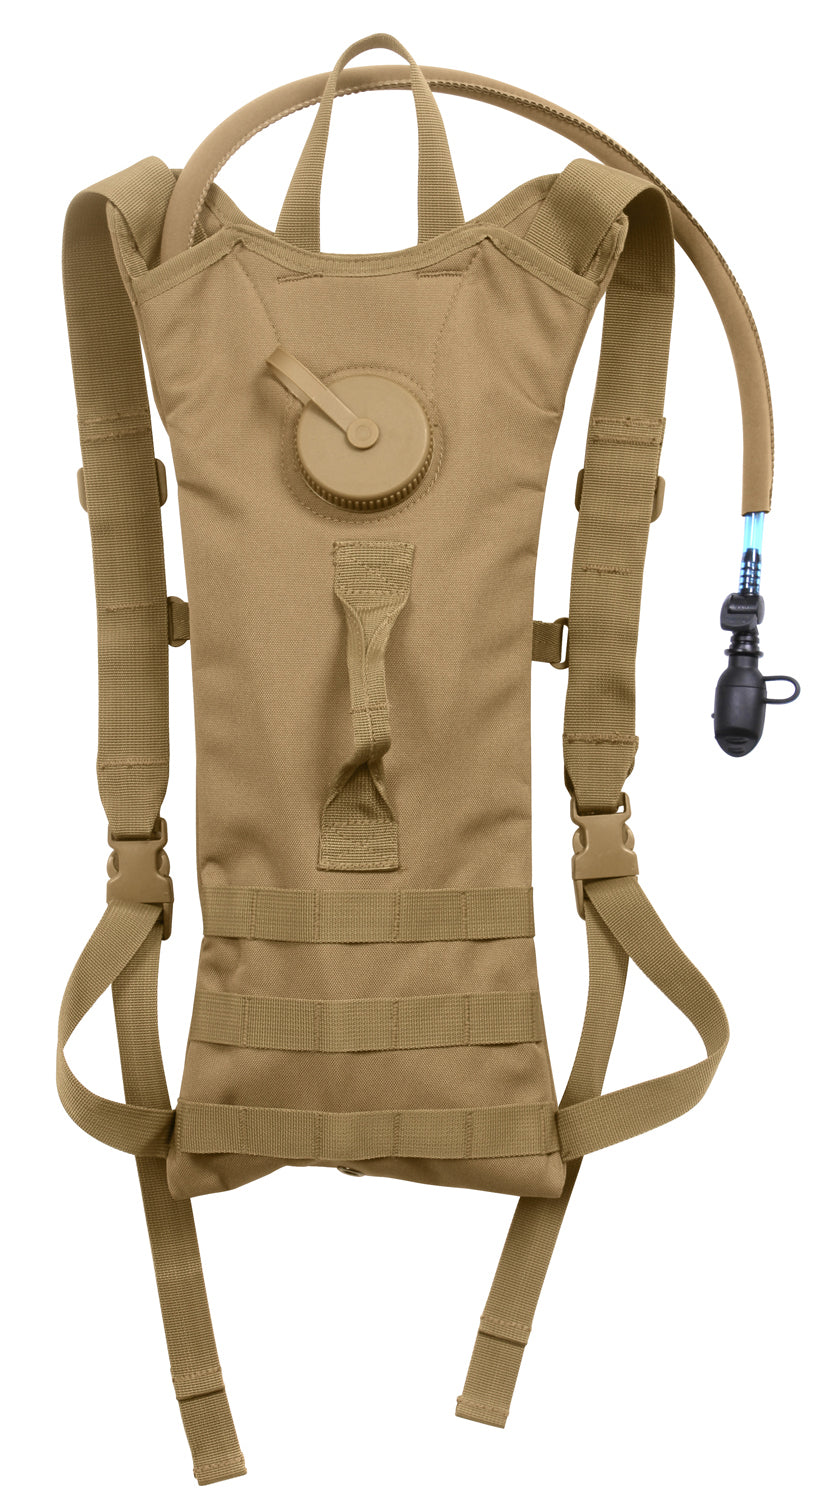 Rothco MOLLE 3 Liter Backstrap Hydration System